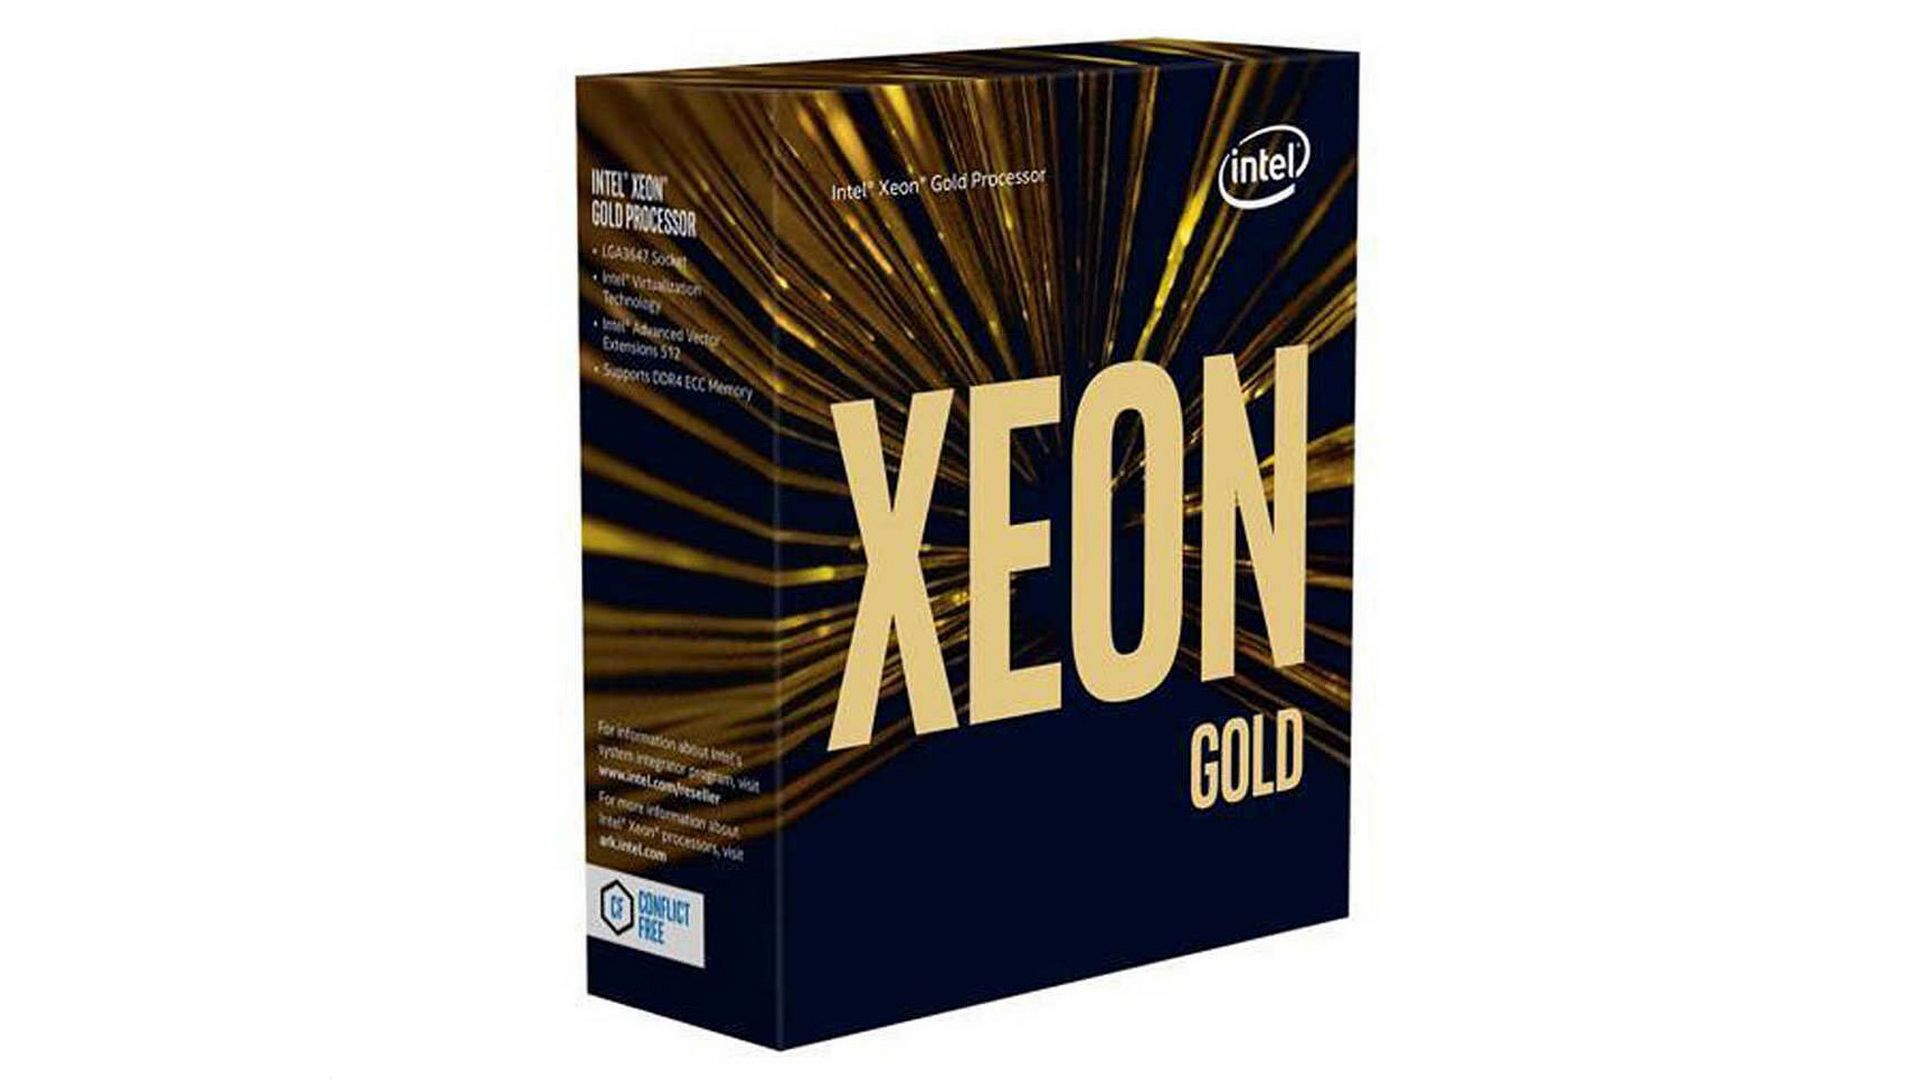 CPU Intel Xeon Gold 6130 (Up to 3.7GHz / 22MB / 16 Cores, 32 Threads / LGA3647)